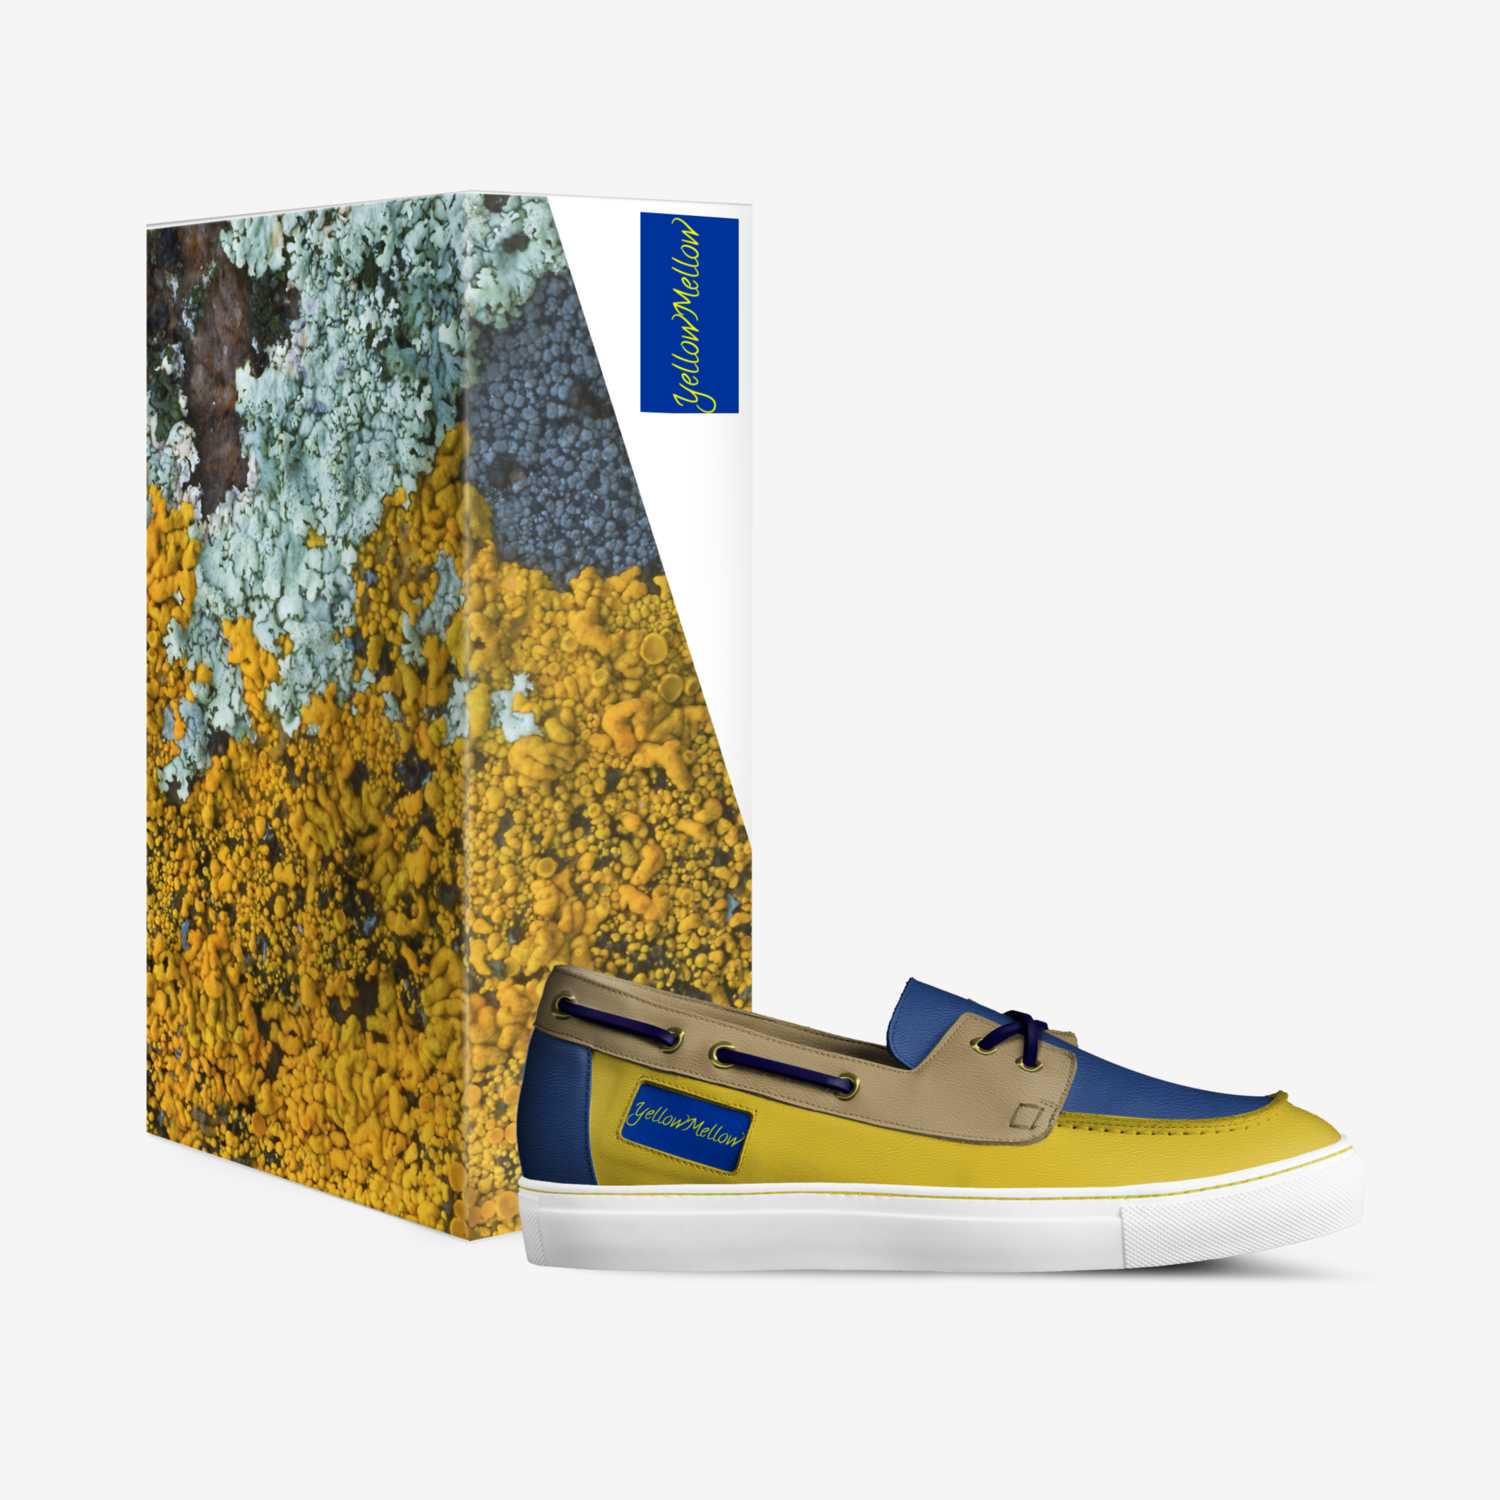 YellowMellow custom made in Italy shoes by Mira Memora | Box view